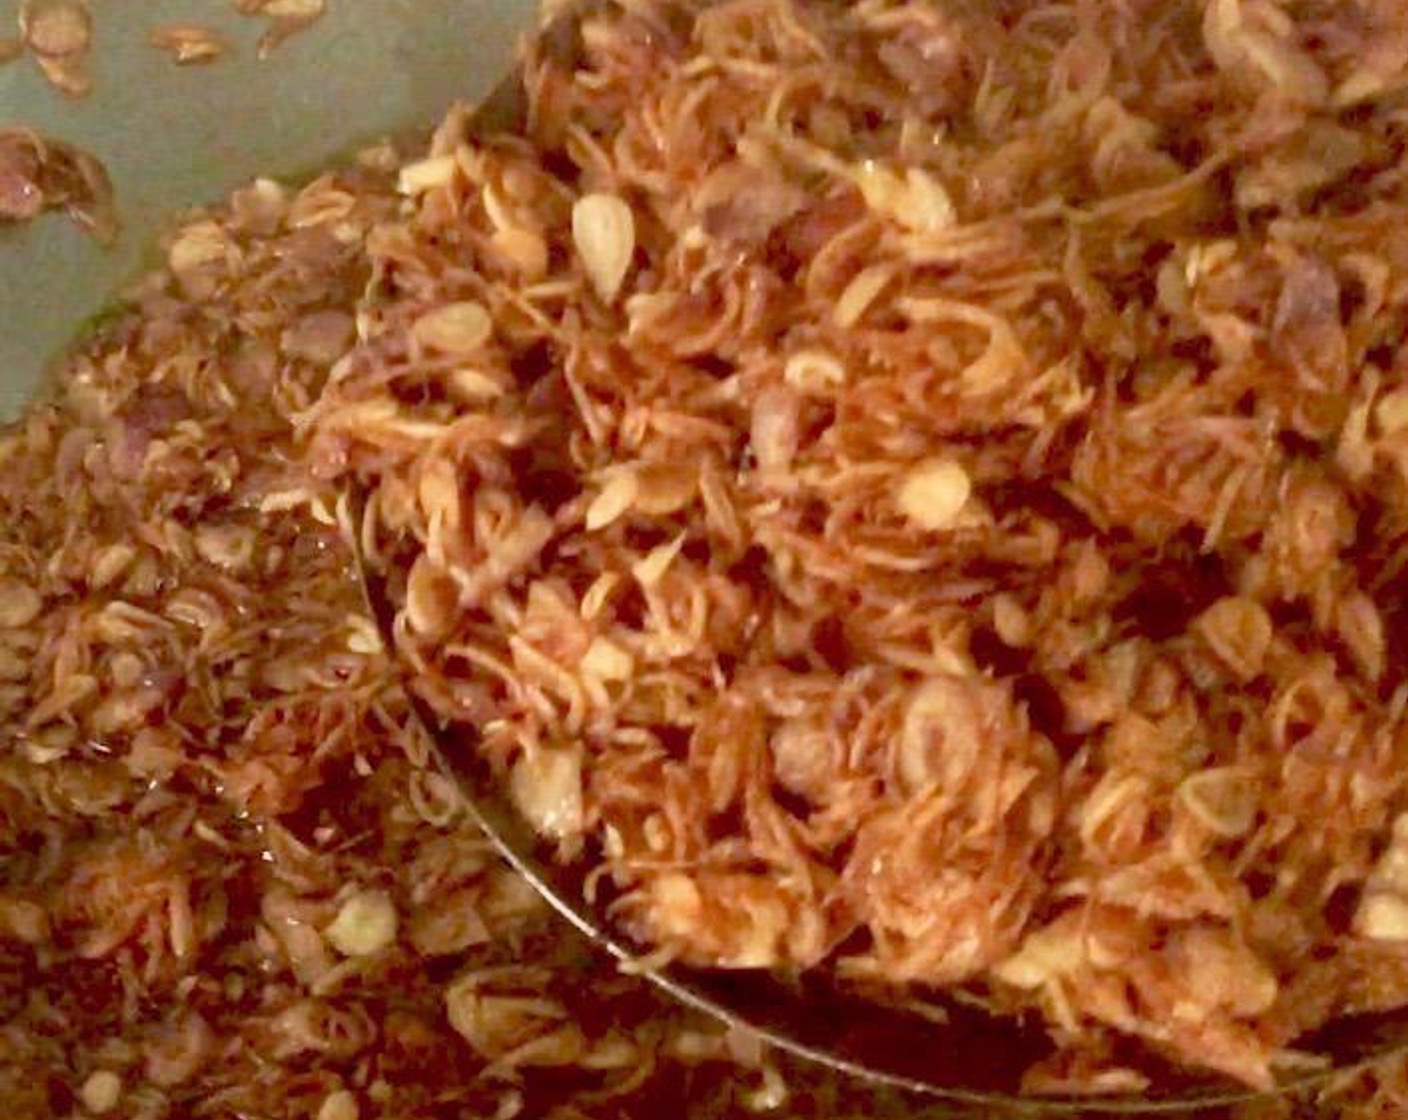 step 6 Remove fried shallots from oil using a slotted spoon. Keep the shallot infused oil in a covered container.